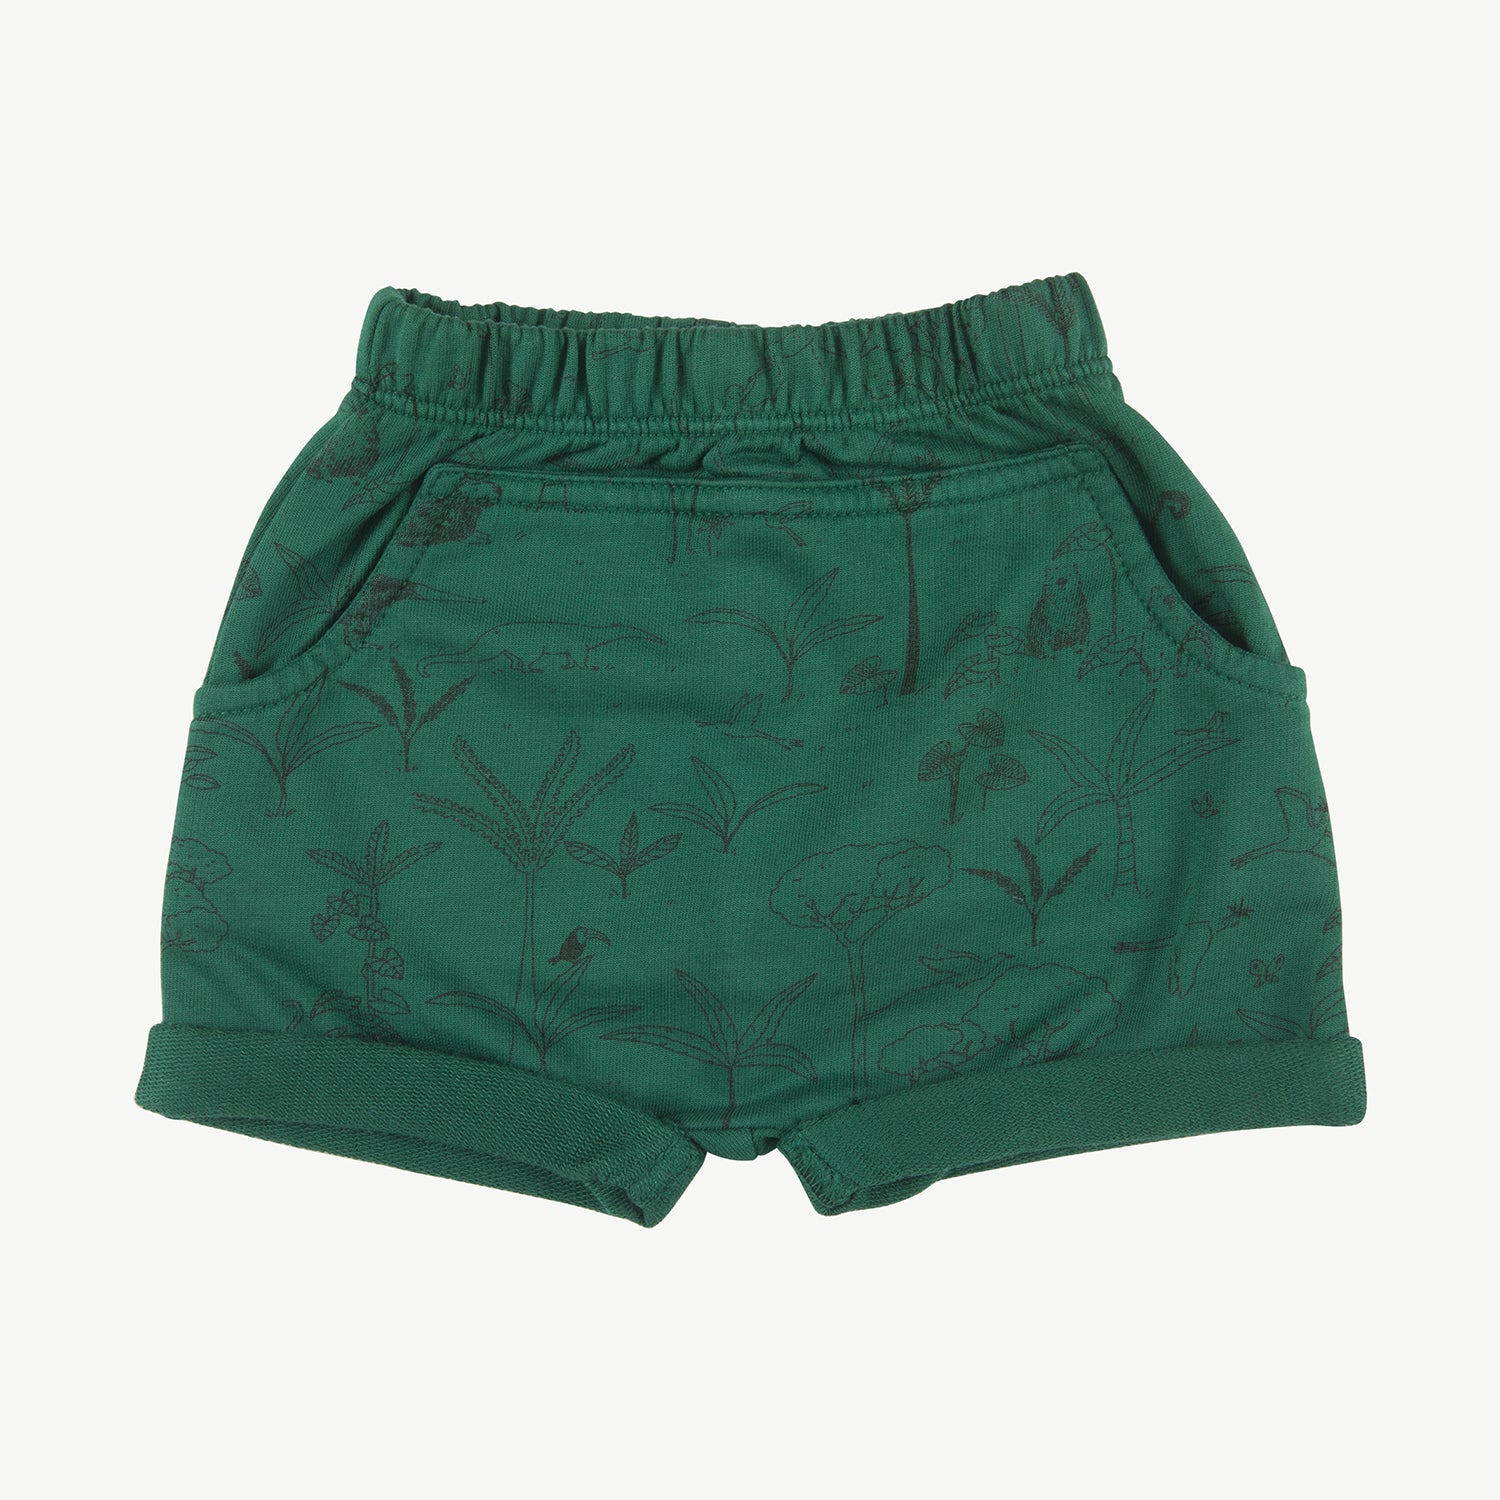 'the story' antique green shorts